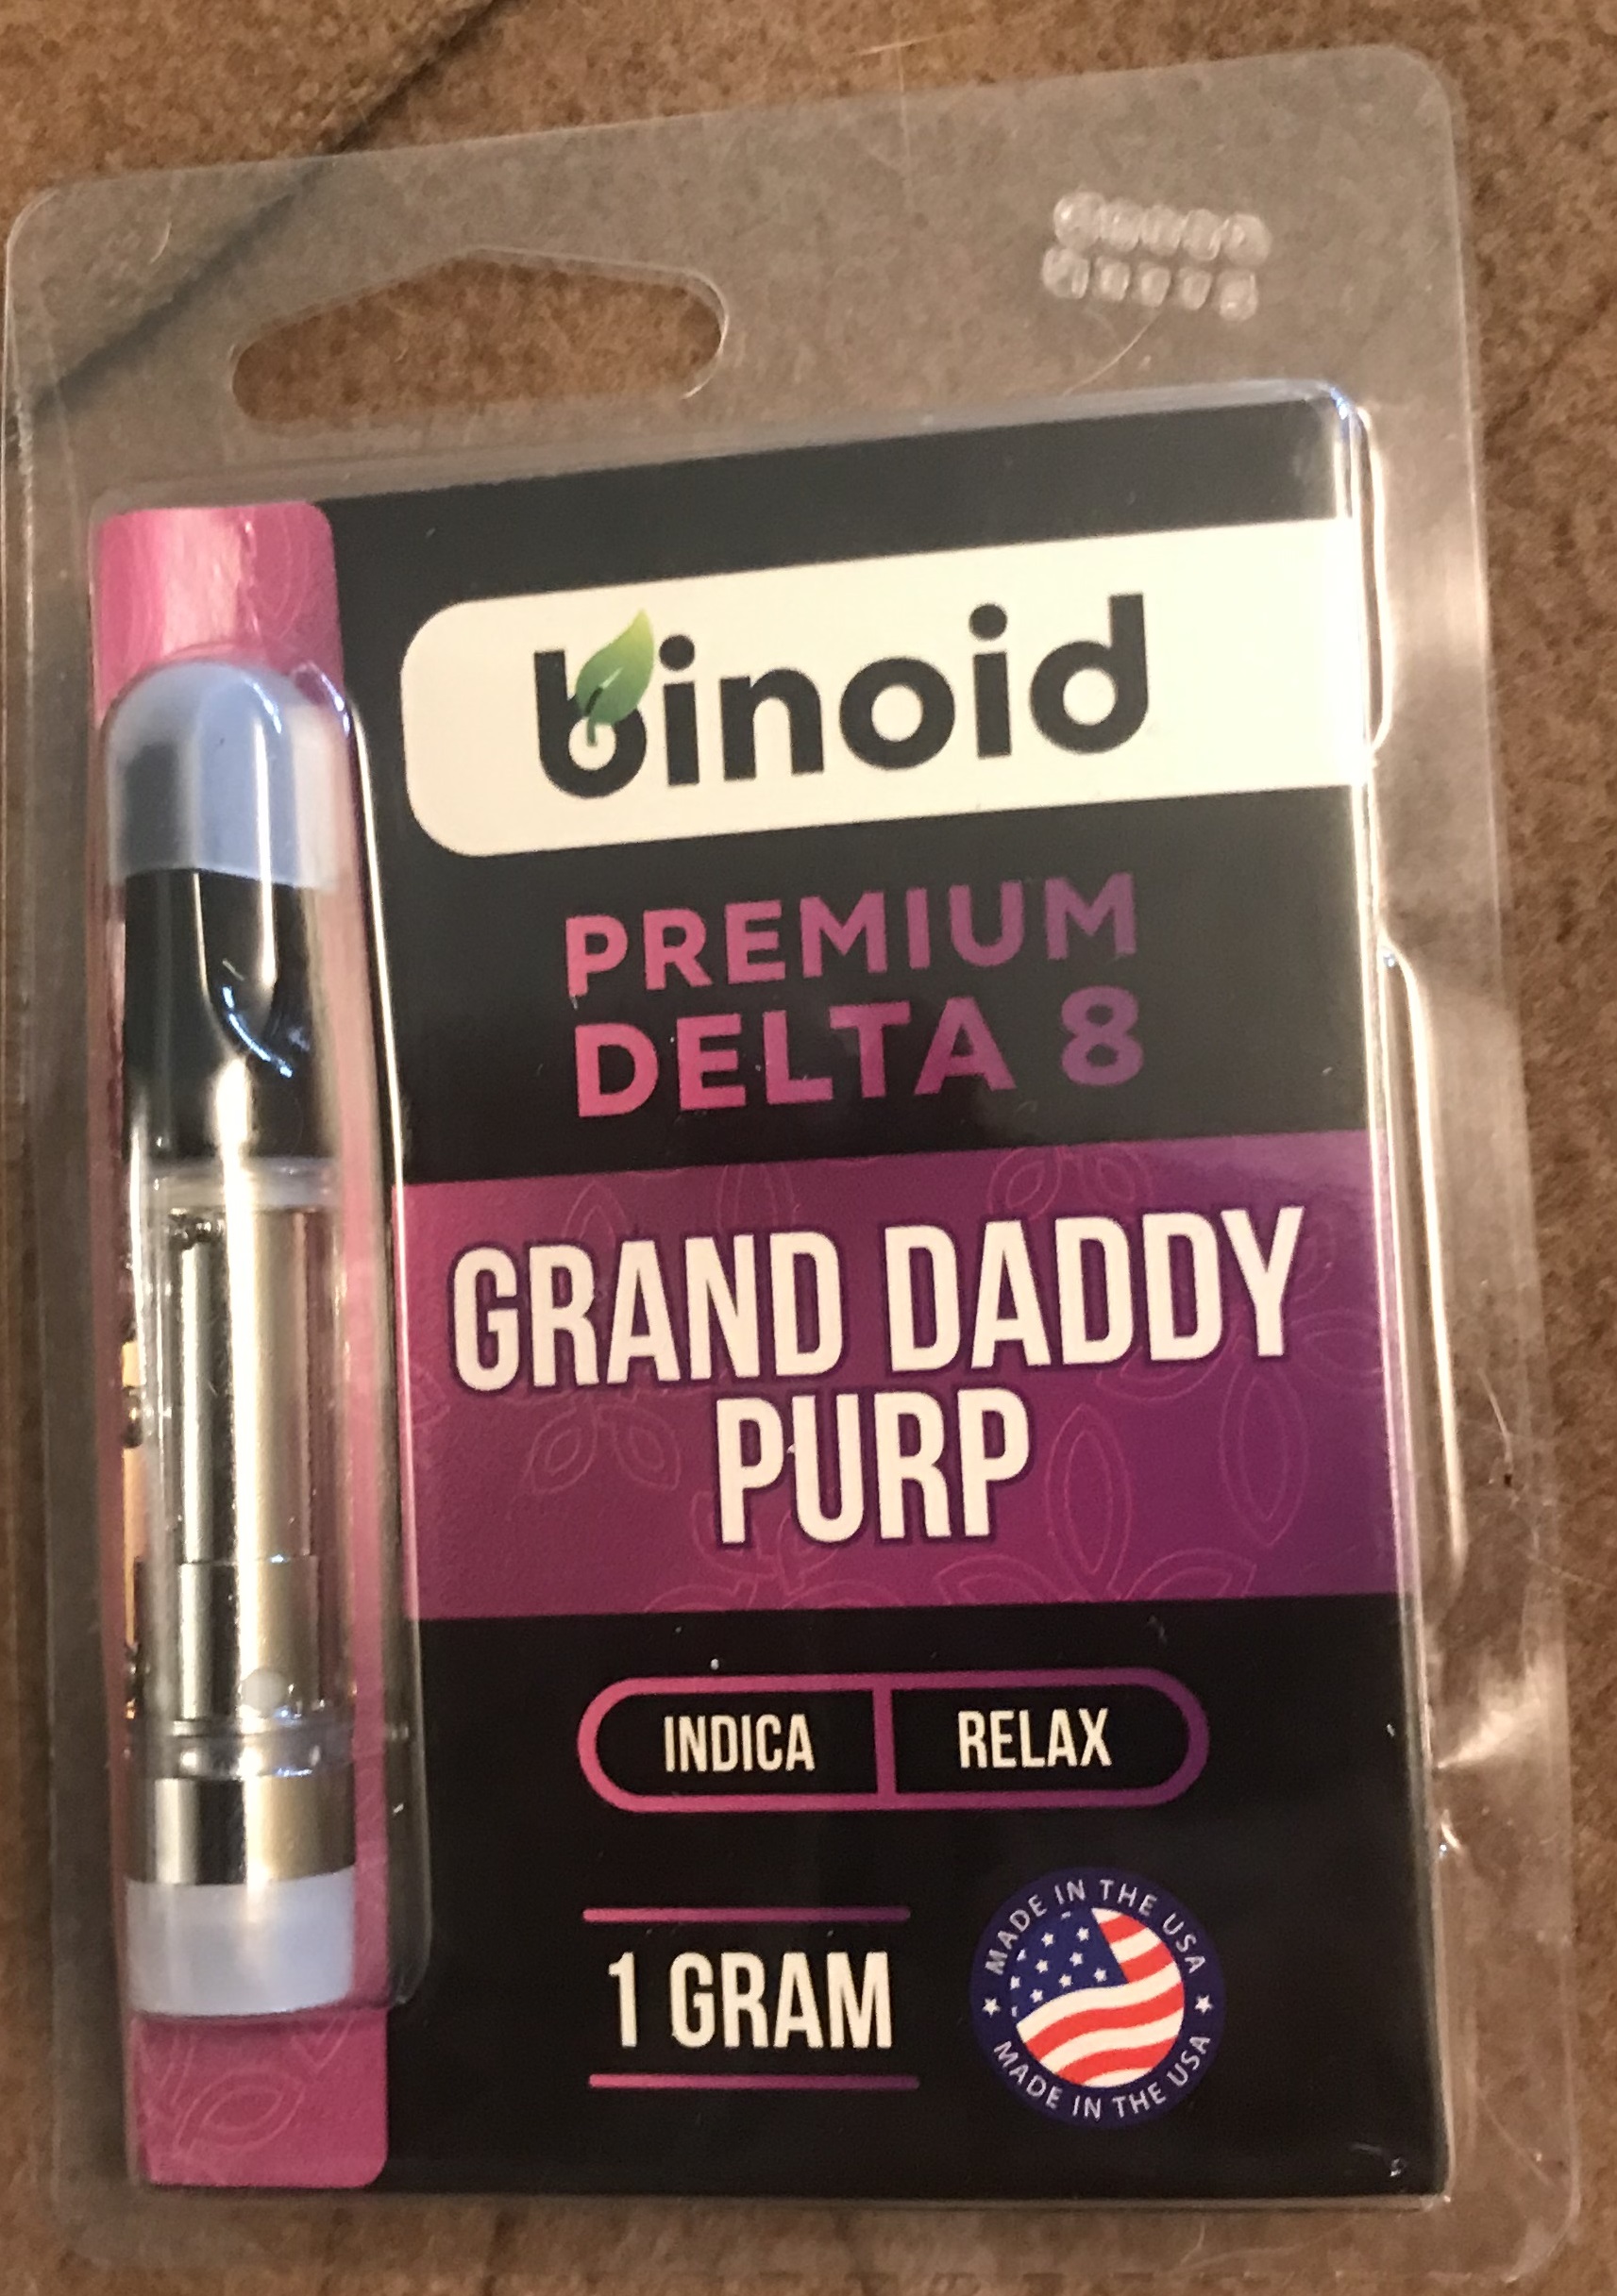 Is Delta 8 Legal To Fly With - Products|Thc|Hemp|Brand|Gummies|Product|Delta-8|Cbd|Origin|Cannabis|Delta|Users|Effects|Cartridges|Brands|Range|List|Research|Usasource|Options|Benefits|Plant|Companies|Vape|Source|Results|Gummy|People|Space|High-Quality|Quality|Place|Overview|Flowers|Lab|Drug|Cannabinoids|Tinctures|Overviewproducts|Cartridge|Delta-8 Thc|Delta-8 Products|Delta-9 Thc|Delta-8 Brands|Usa Source|Delta-8 Thc Products|Cannabis Plant|Federal Level|United States|Delta-8 Gummies|Delta-8 Space|Health Canada|Delta Products|Delta-8 Thc Gummies|Delta-8 Companies|Vape Cartridges|Similar Benefits|Hemp Doctor|Brand Overviewproducts|Drug Test|High-Quality Products|Organic Hemp|San Jose|Editorial Team|Farm Bill|Overview Products|Wide Range|Psychoactive Properties|Reliable Provider|Boston Hempire